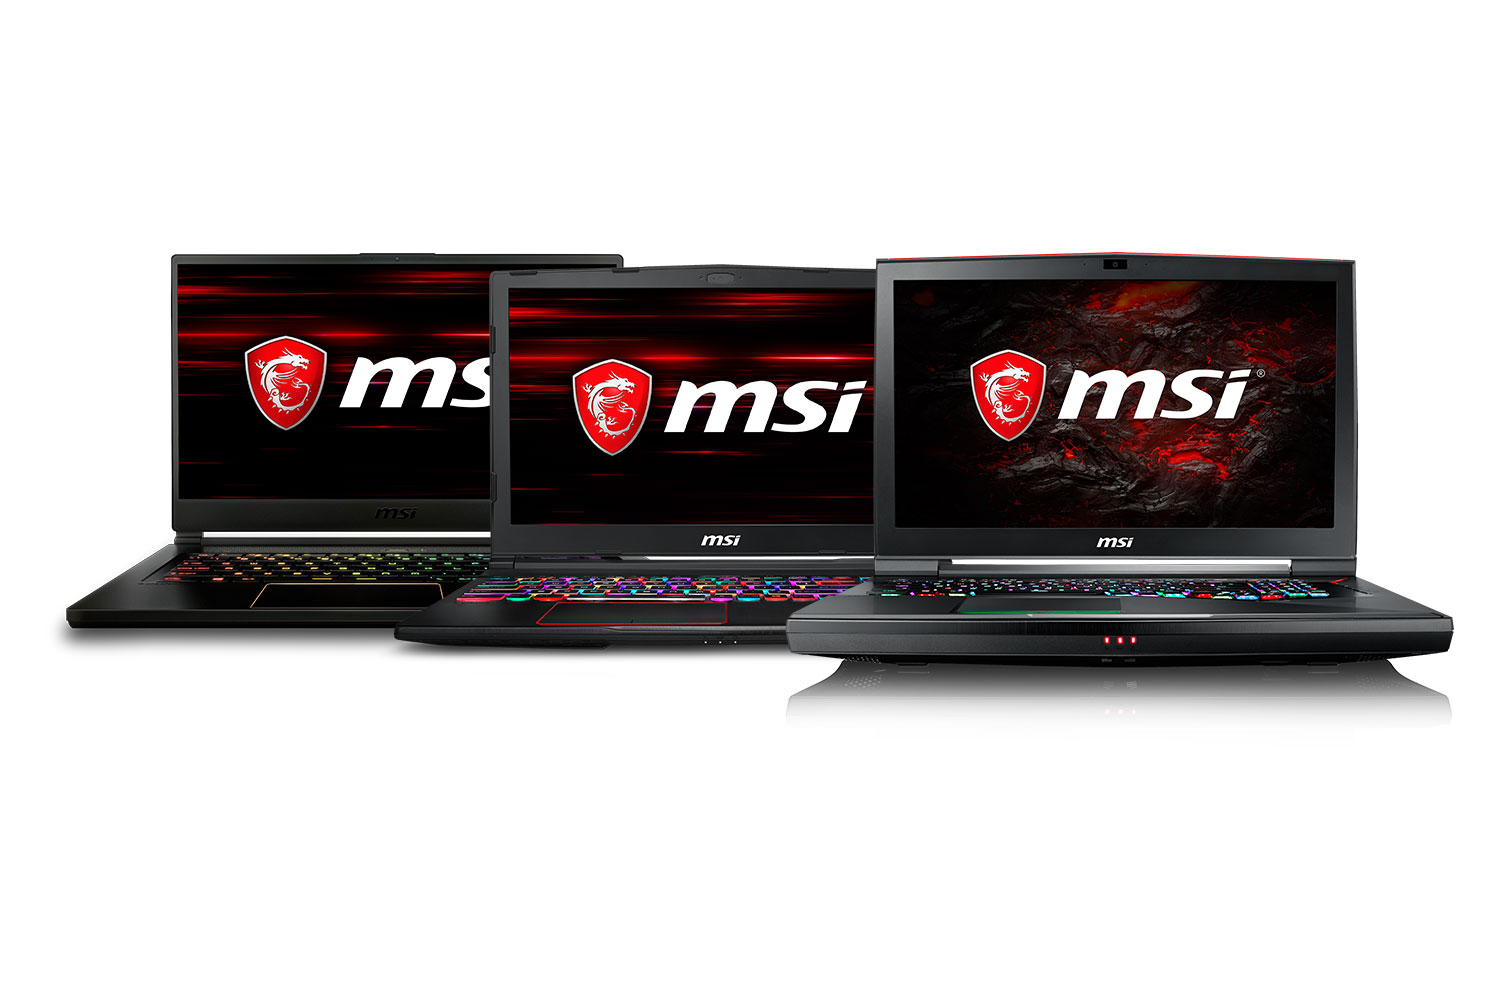 MSI Gaming Laptops with 8th Gen Intel Processors